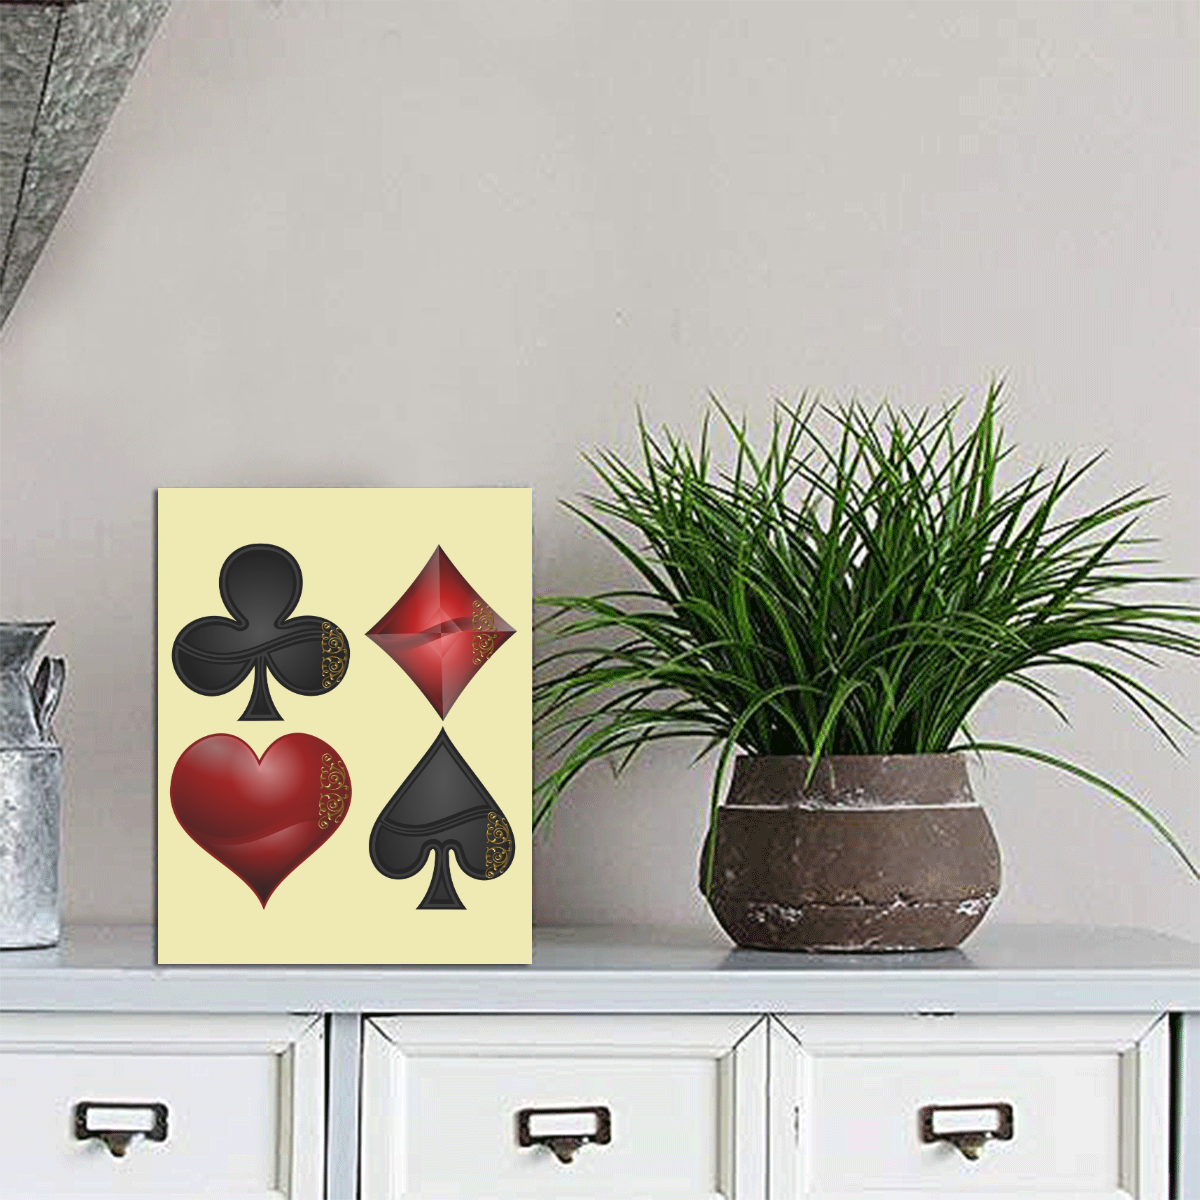 Las Vegas Black and Red Casino Poker Card Shapes  on Yellow Photo Panel for Tabletop Display 6"x8"